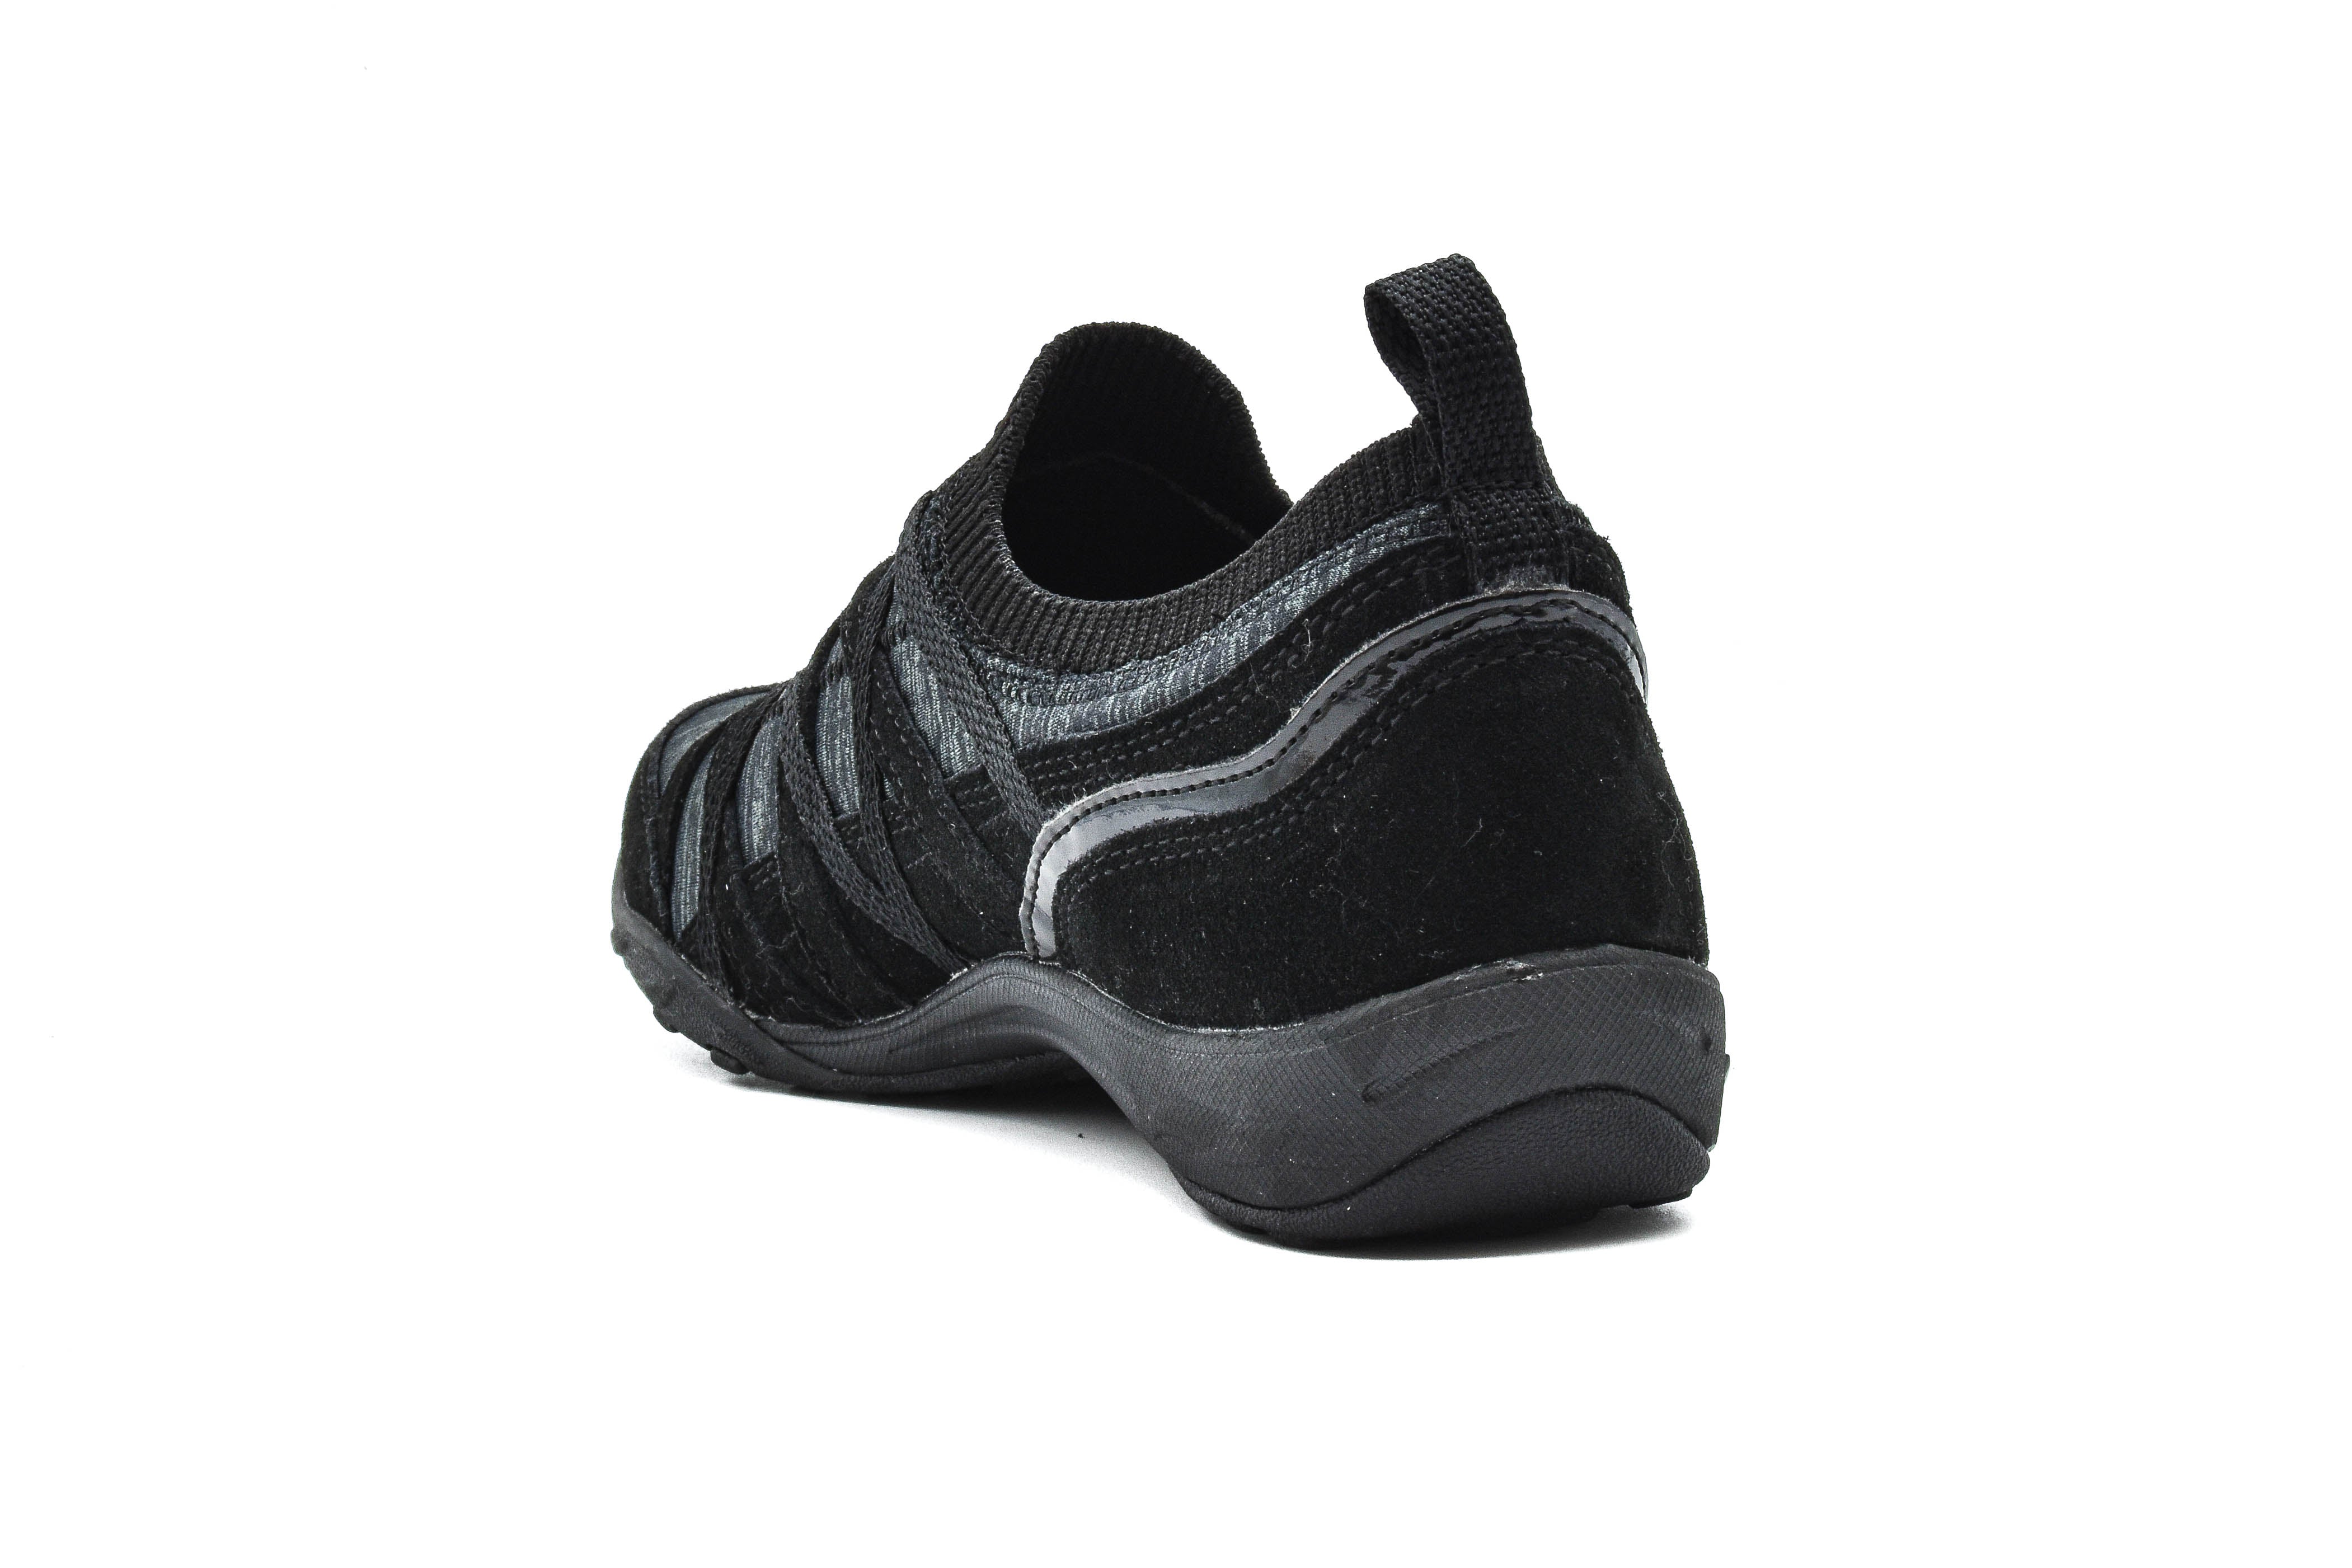 SKECHERS Arch Fit Comfy